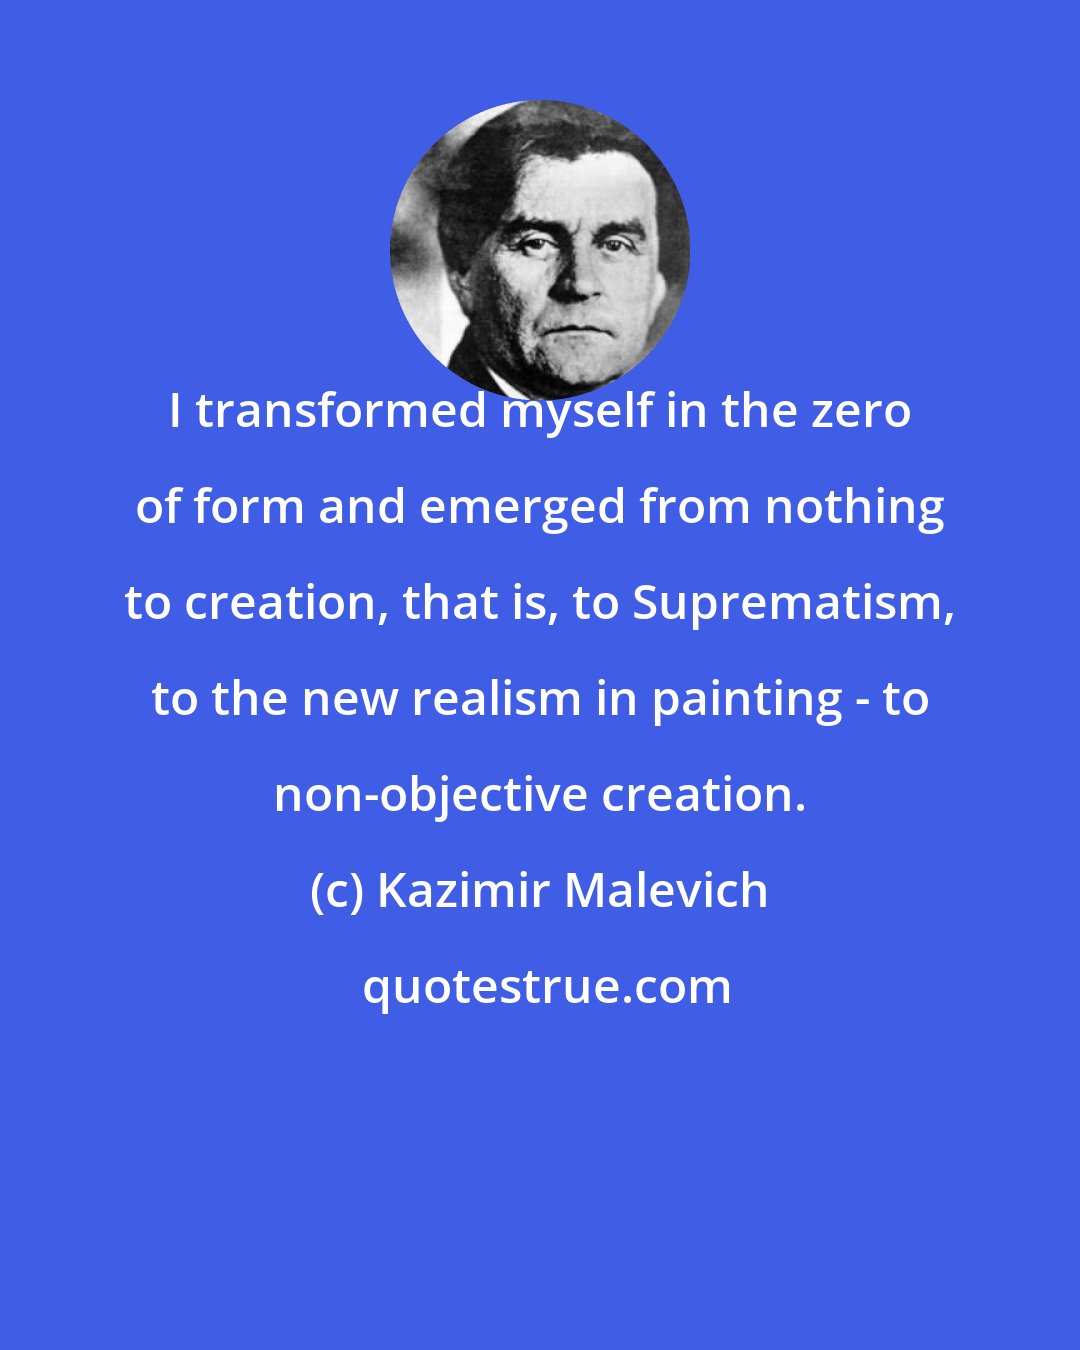 Kazimir Malevich: I transformed myself in the zero of form and emerged from nothing to creation, that is, to Suprematism, to the new realism in painting - to non-objective creation.